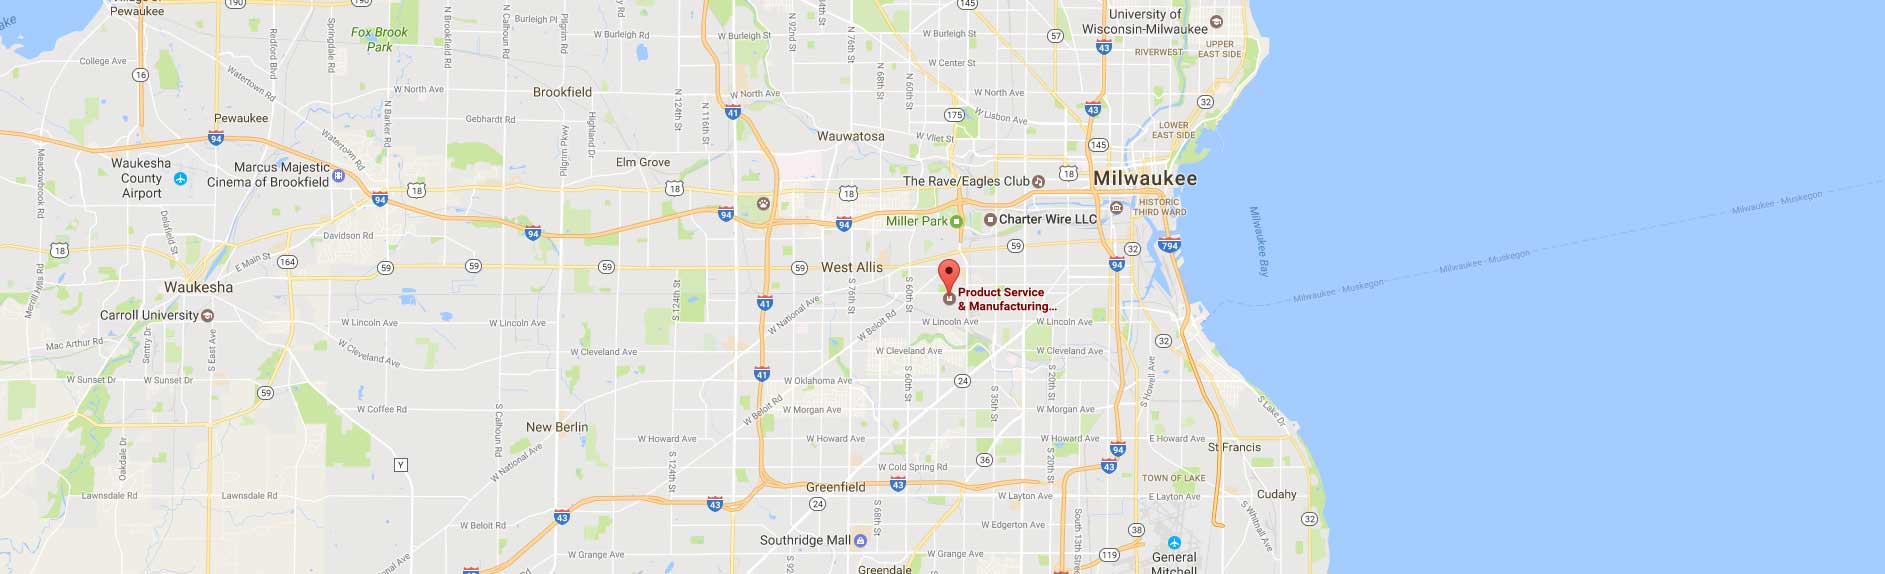 Product Service and Manufacturing - 4700 W Electric Ave, West Milwaukee, WI 53219